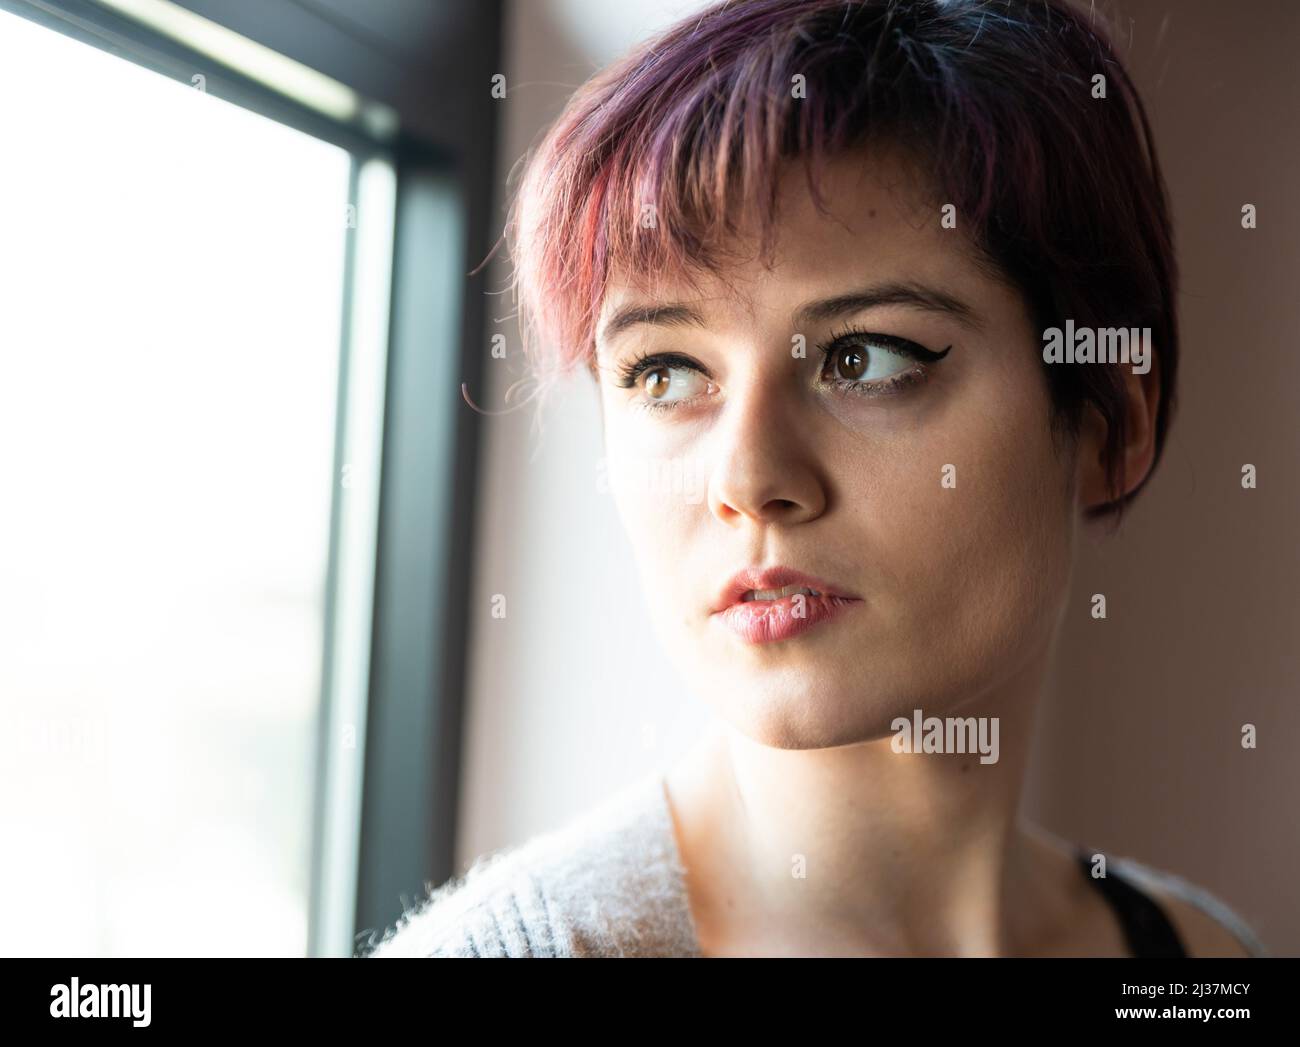 Home fashion portrait of a 23 year old white woman with short, dyed hair, Brussels, Belgium. Stock Photo